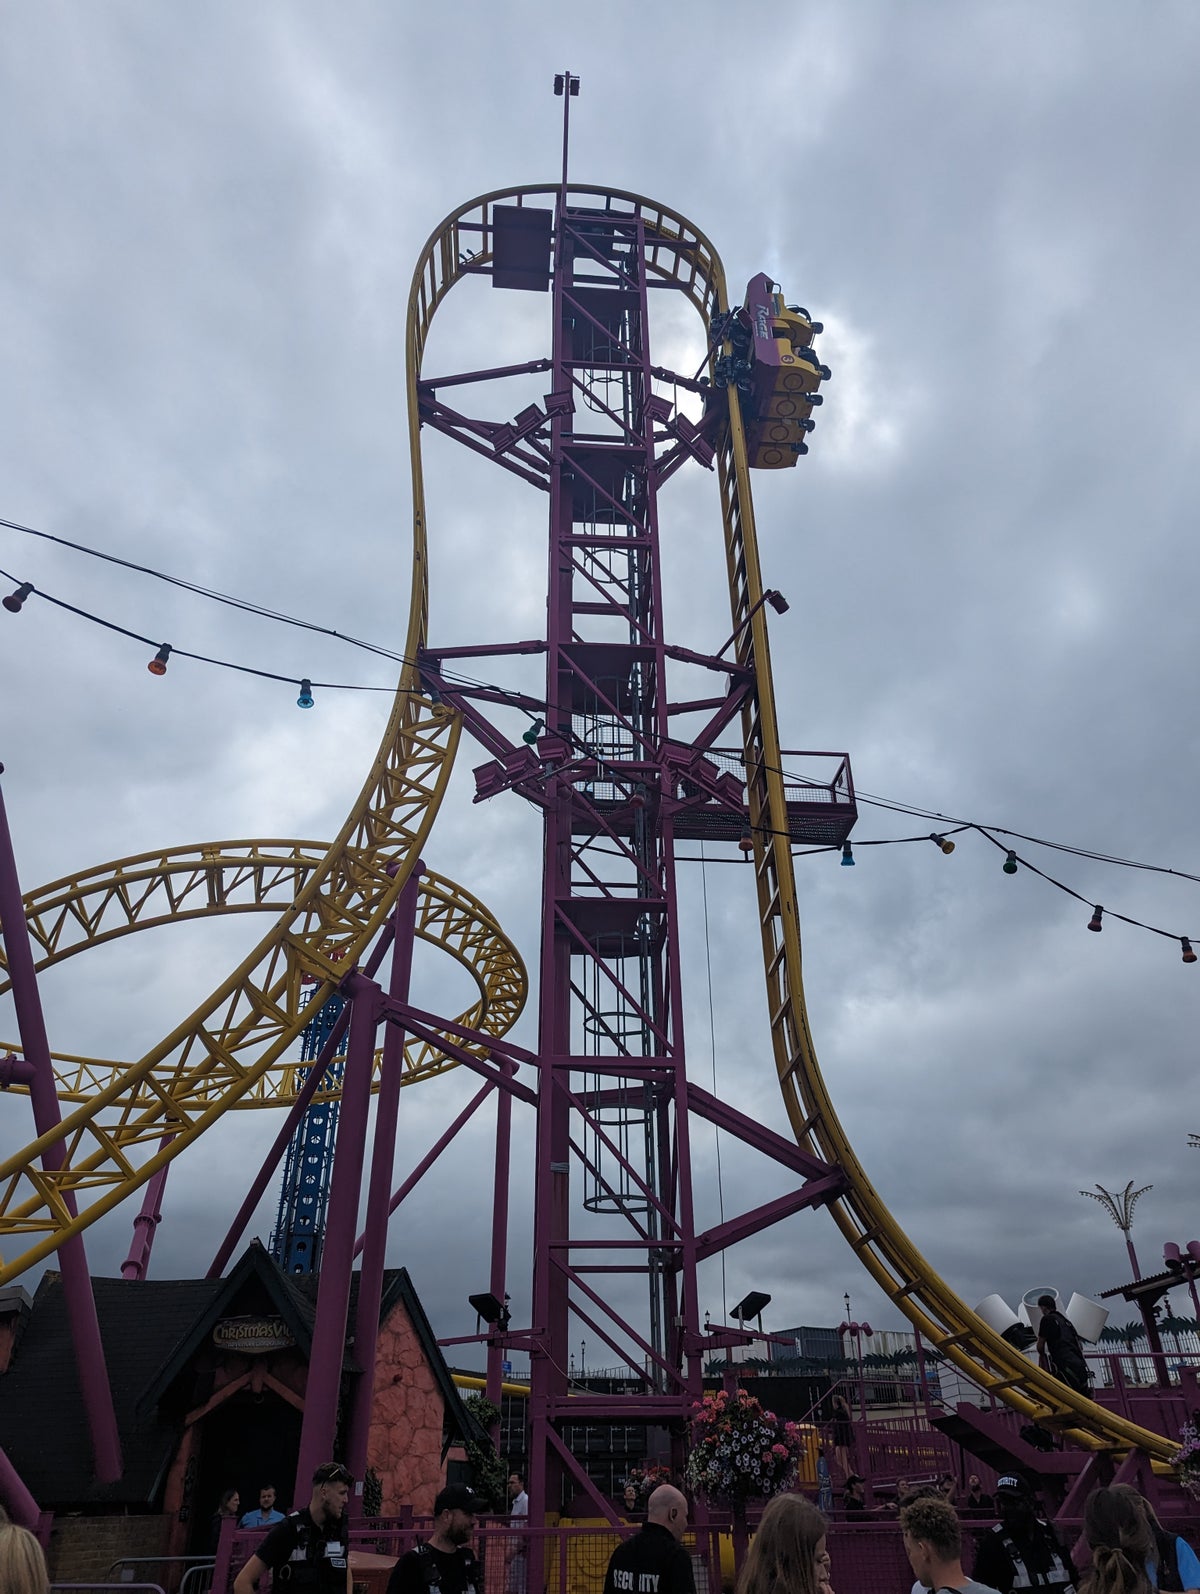 Riders suspended in air on 72-foot rollercoaster for 40 minutes